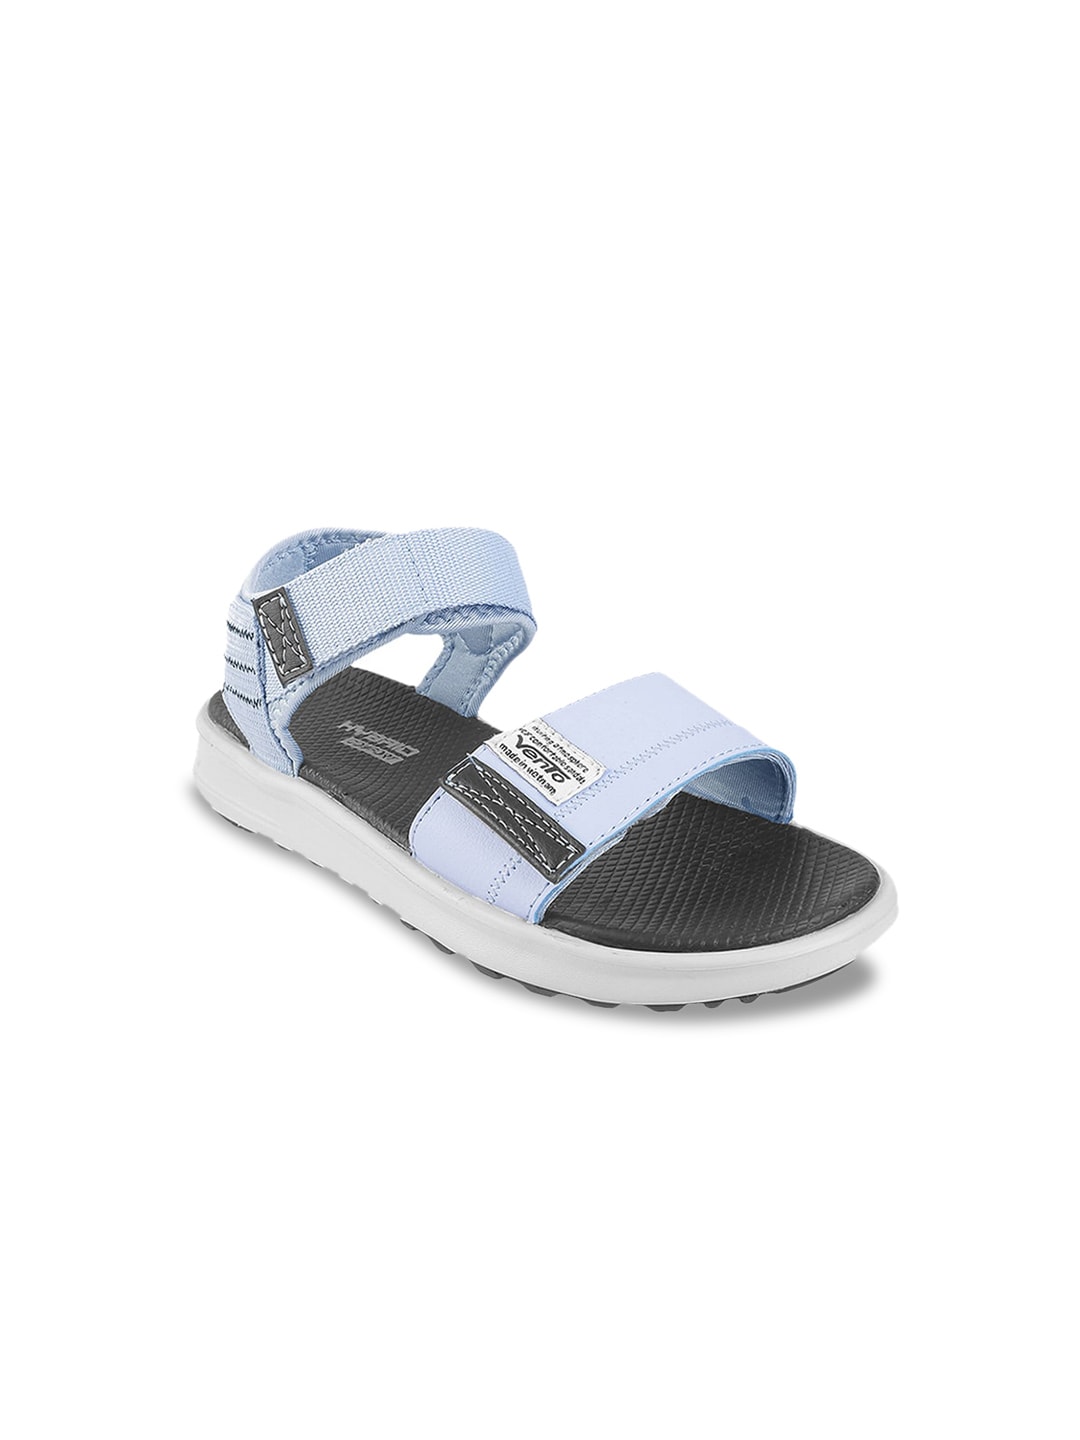 Vento Unisex Blue Solid Sports Sandals Price in India